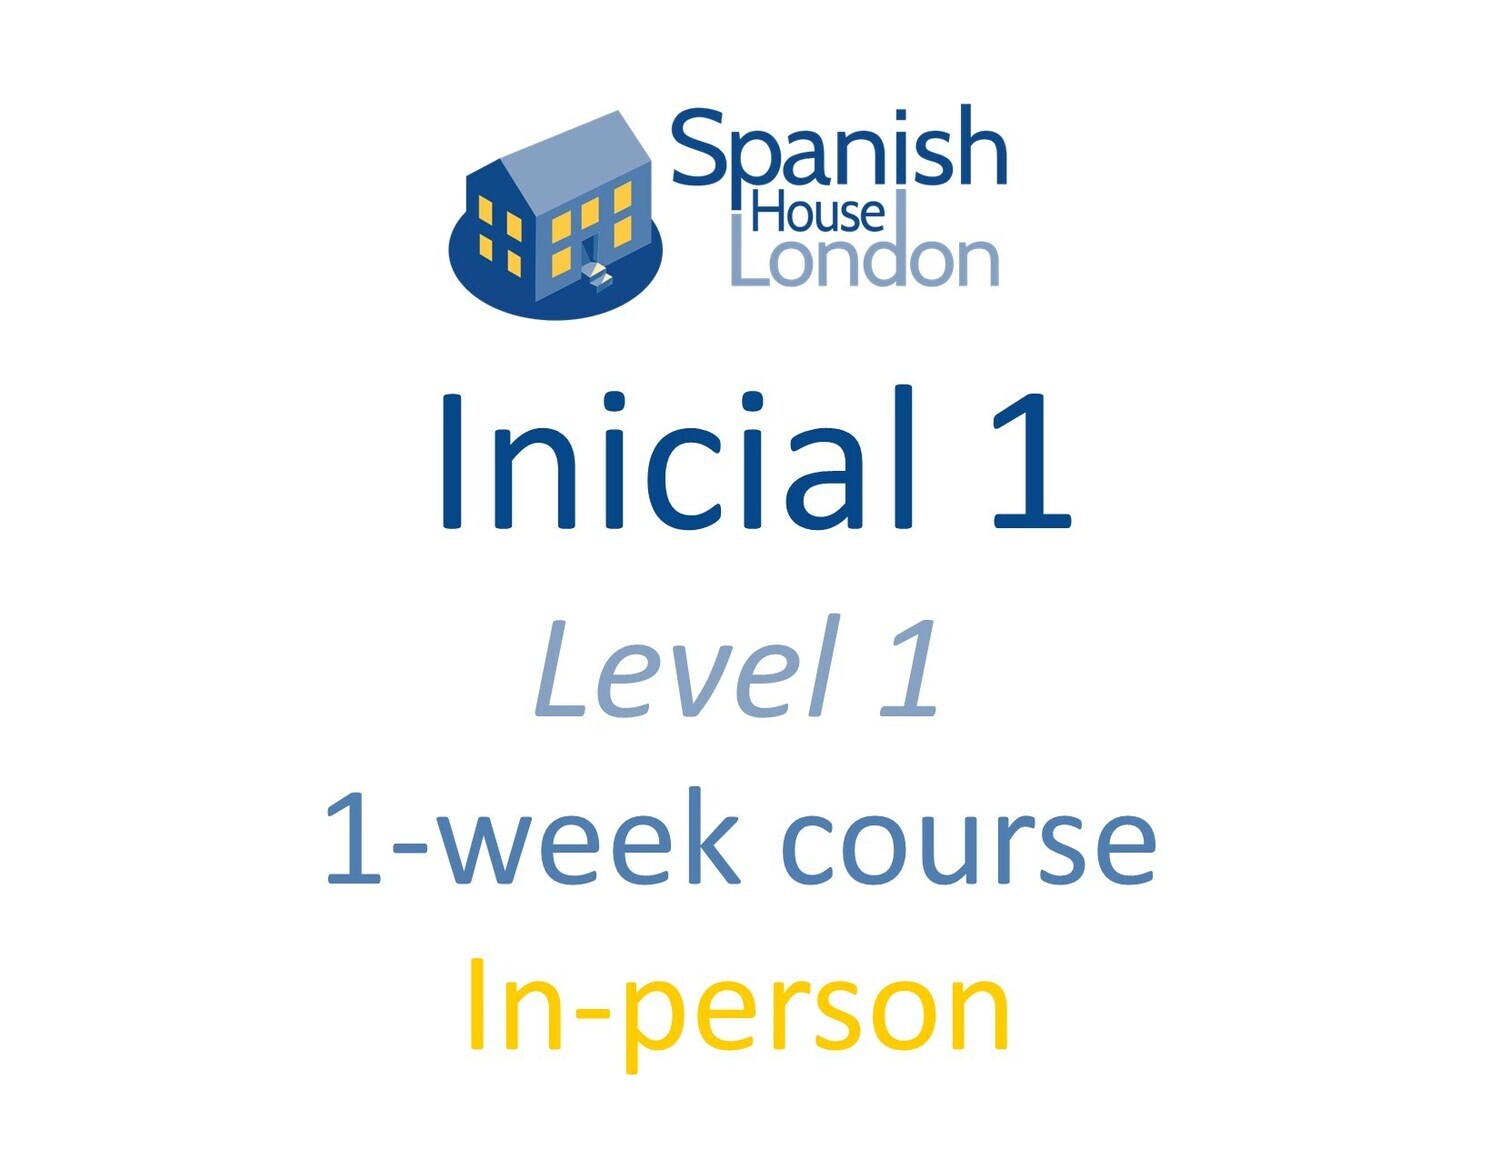 One-Week Intensive Inicial 1 Course starting on 6th November at 10.30am in Clapham North